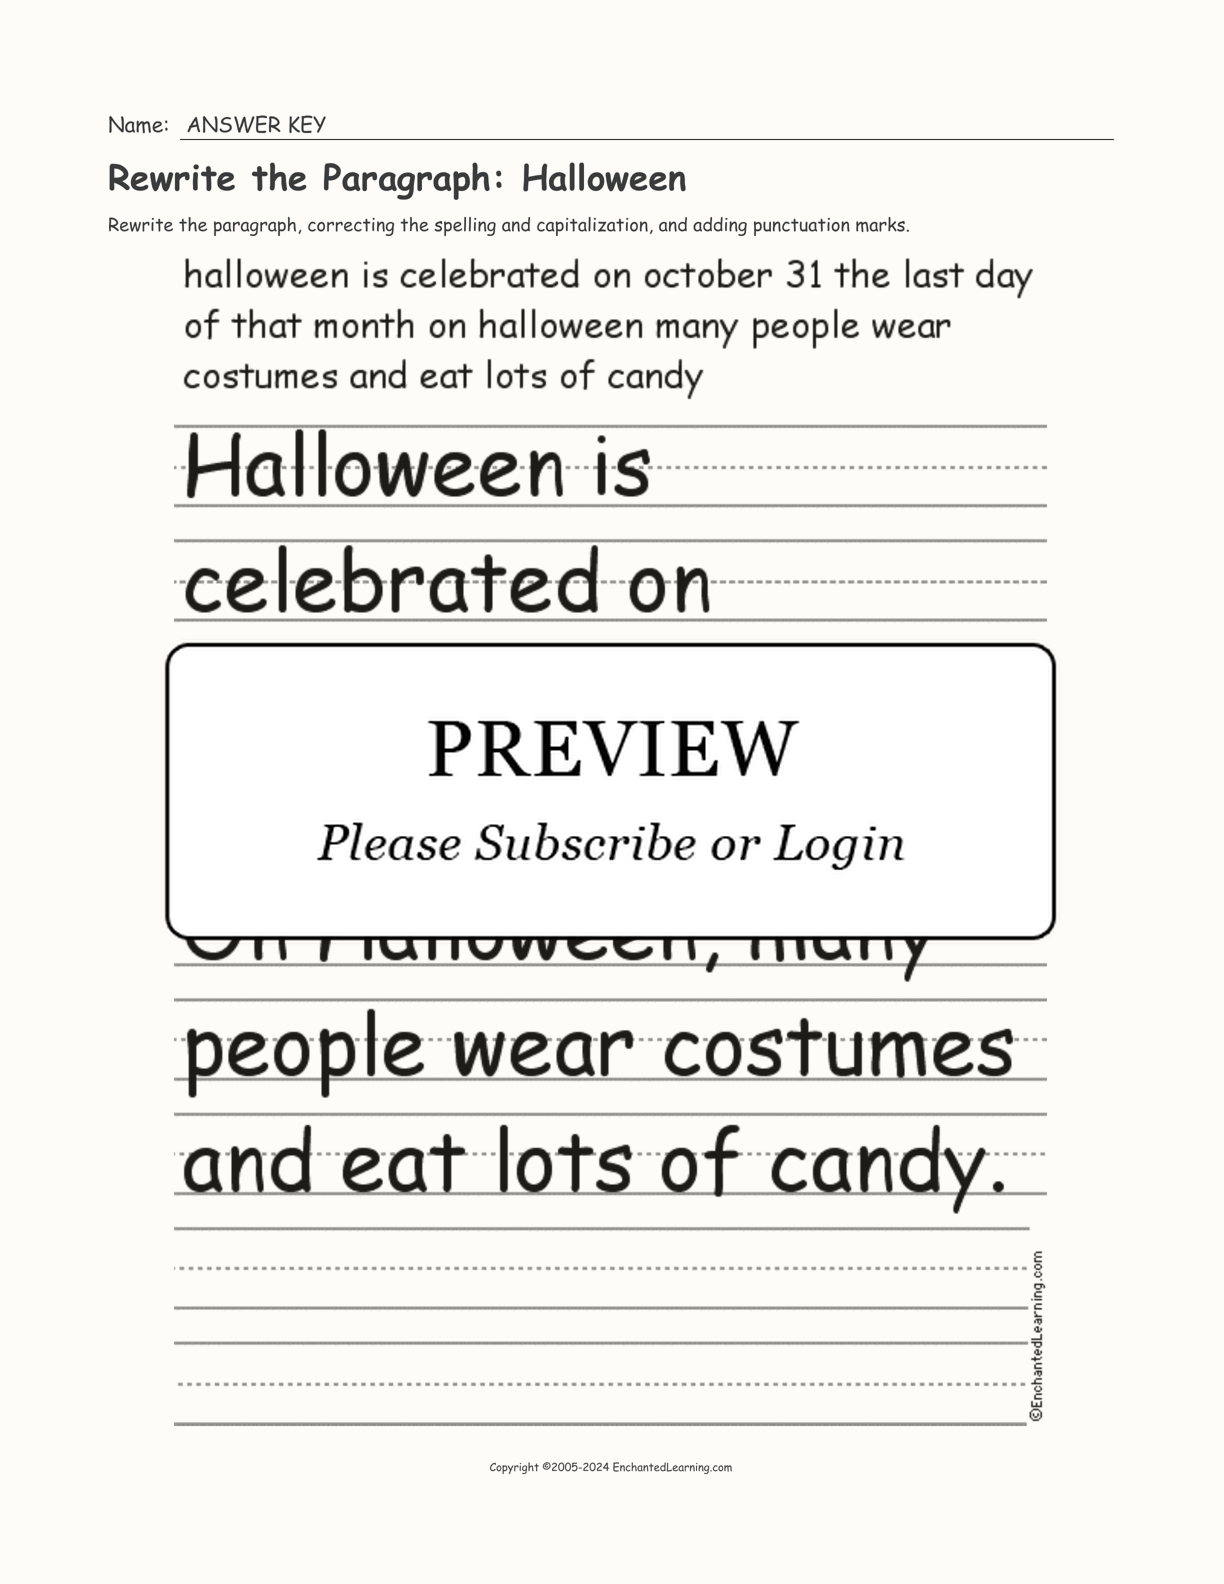 Rewrite the Paragraph: Halloween Printout - Enchanted Learning